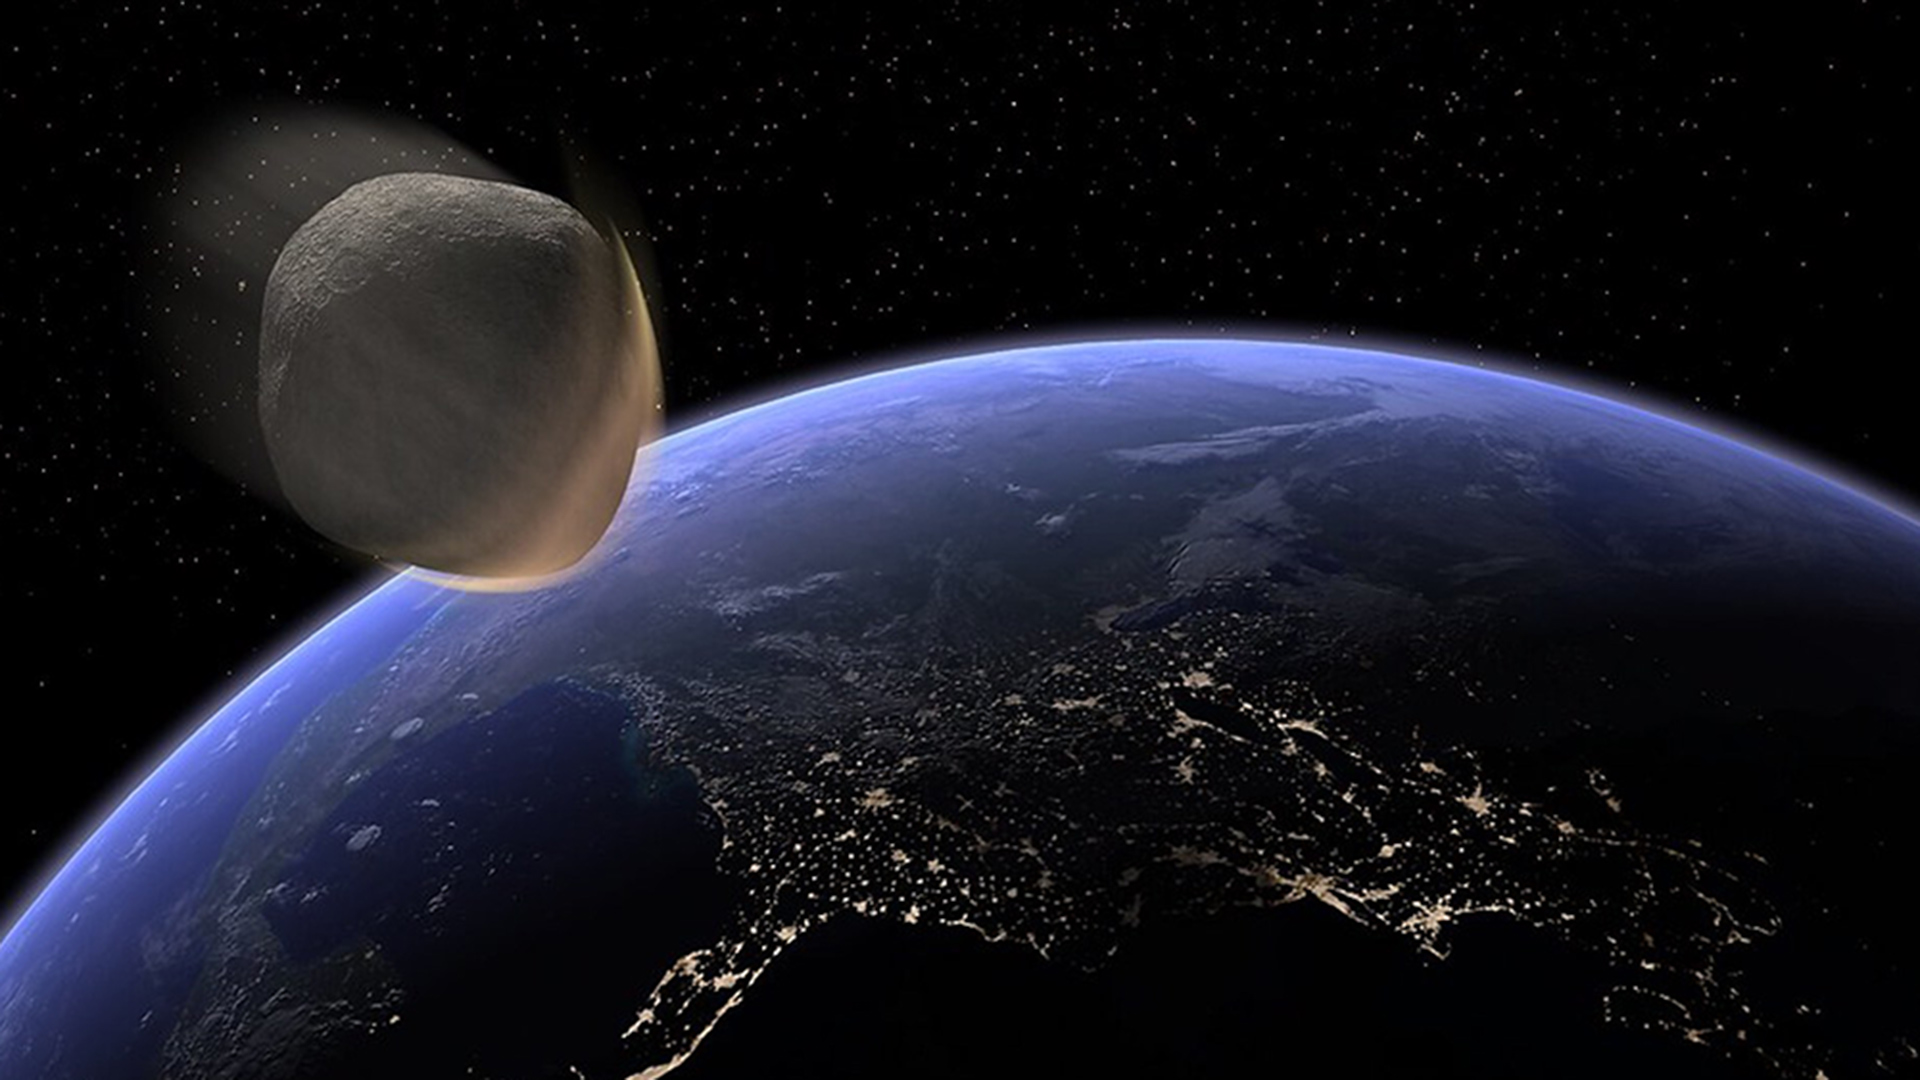 Asteroid approaches Earth's atmosphere.